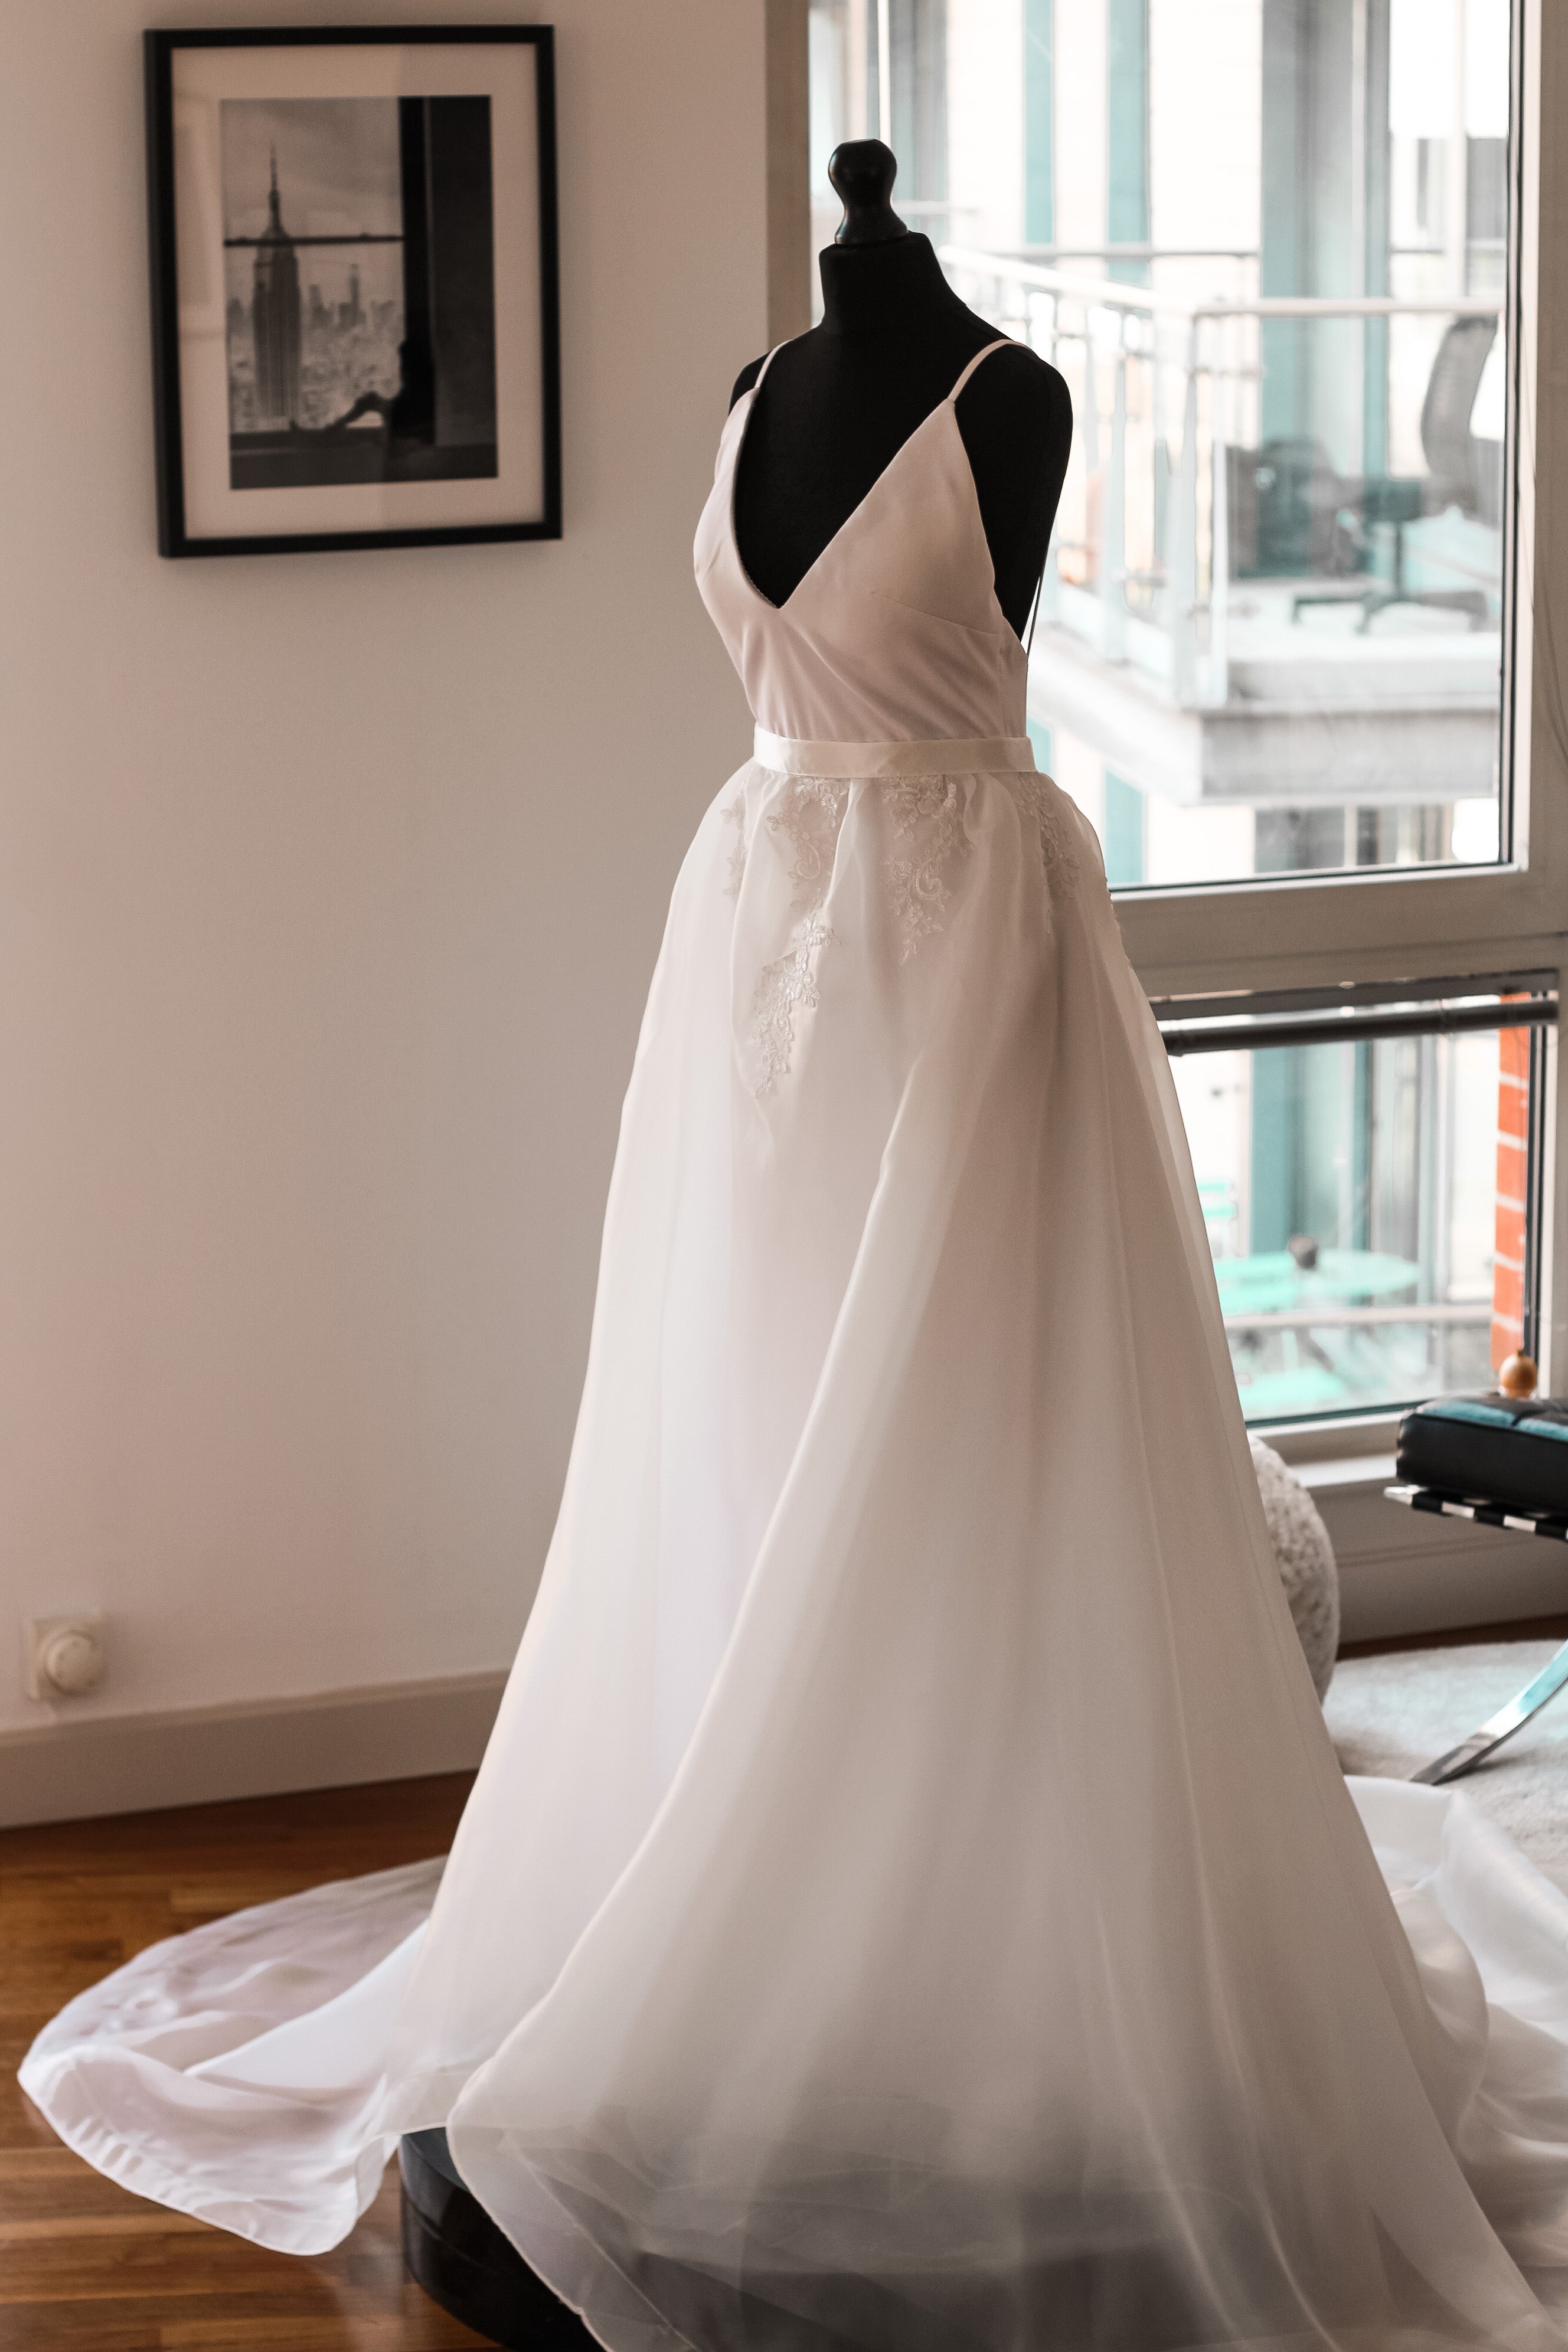 Try At Home - Bridal Organza Overskirt